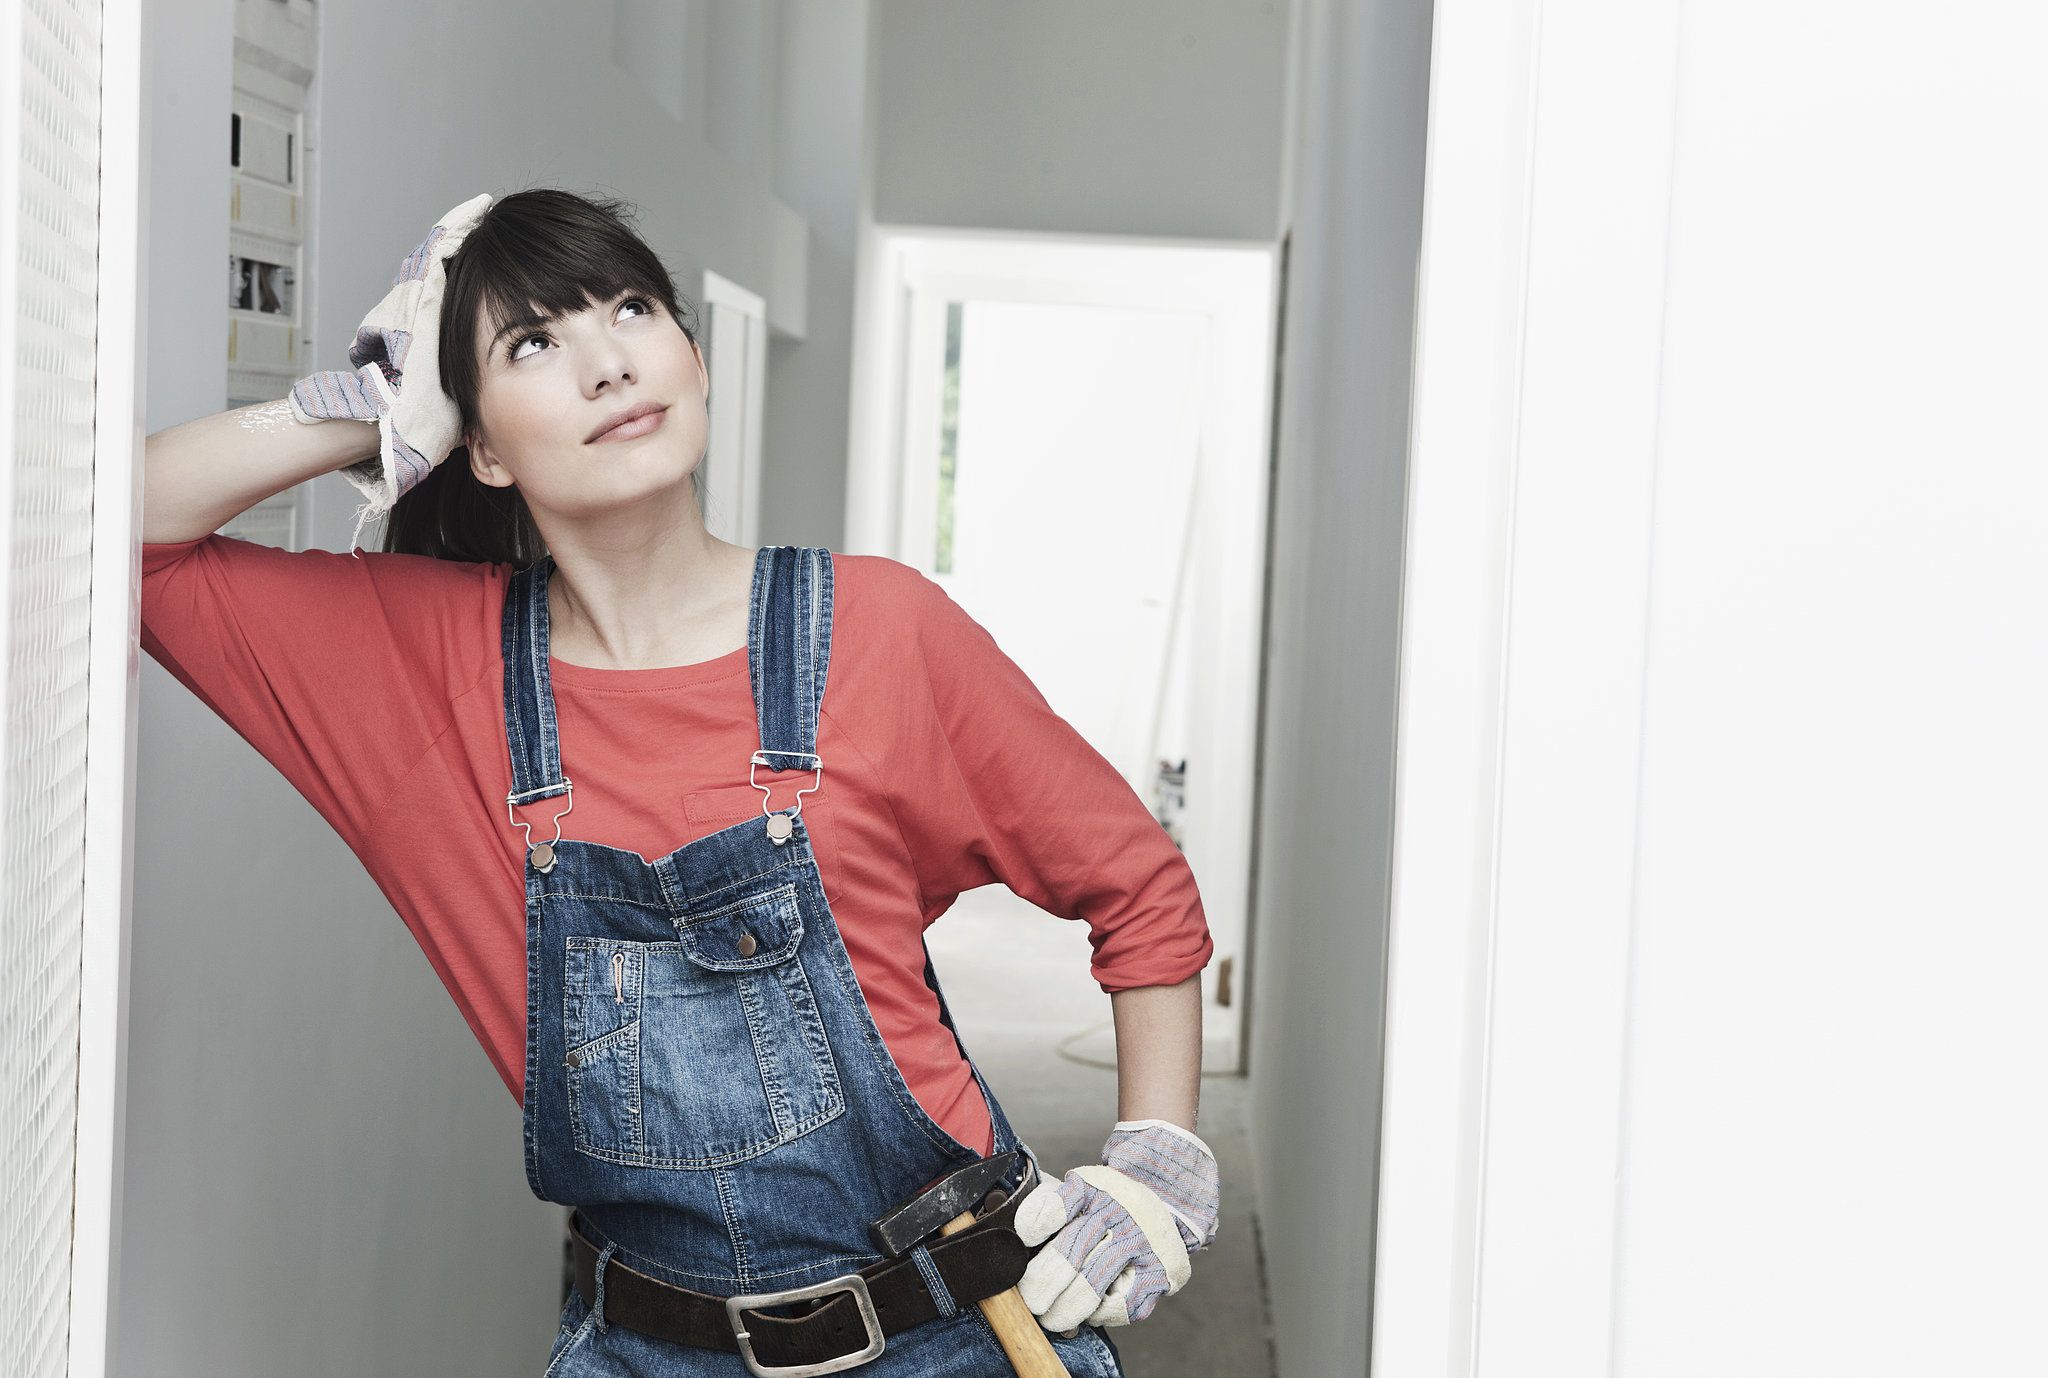 How To Make Home Repairs With FHA 302K